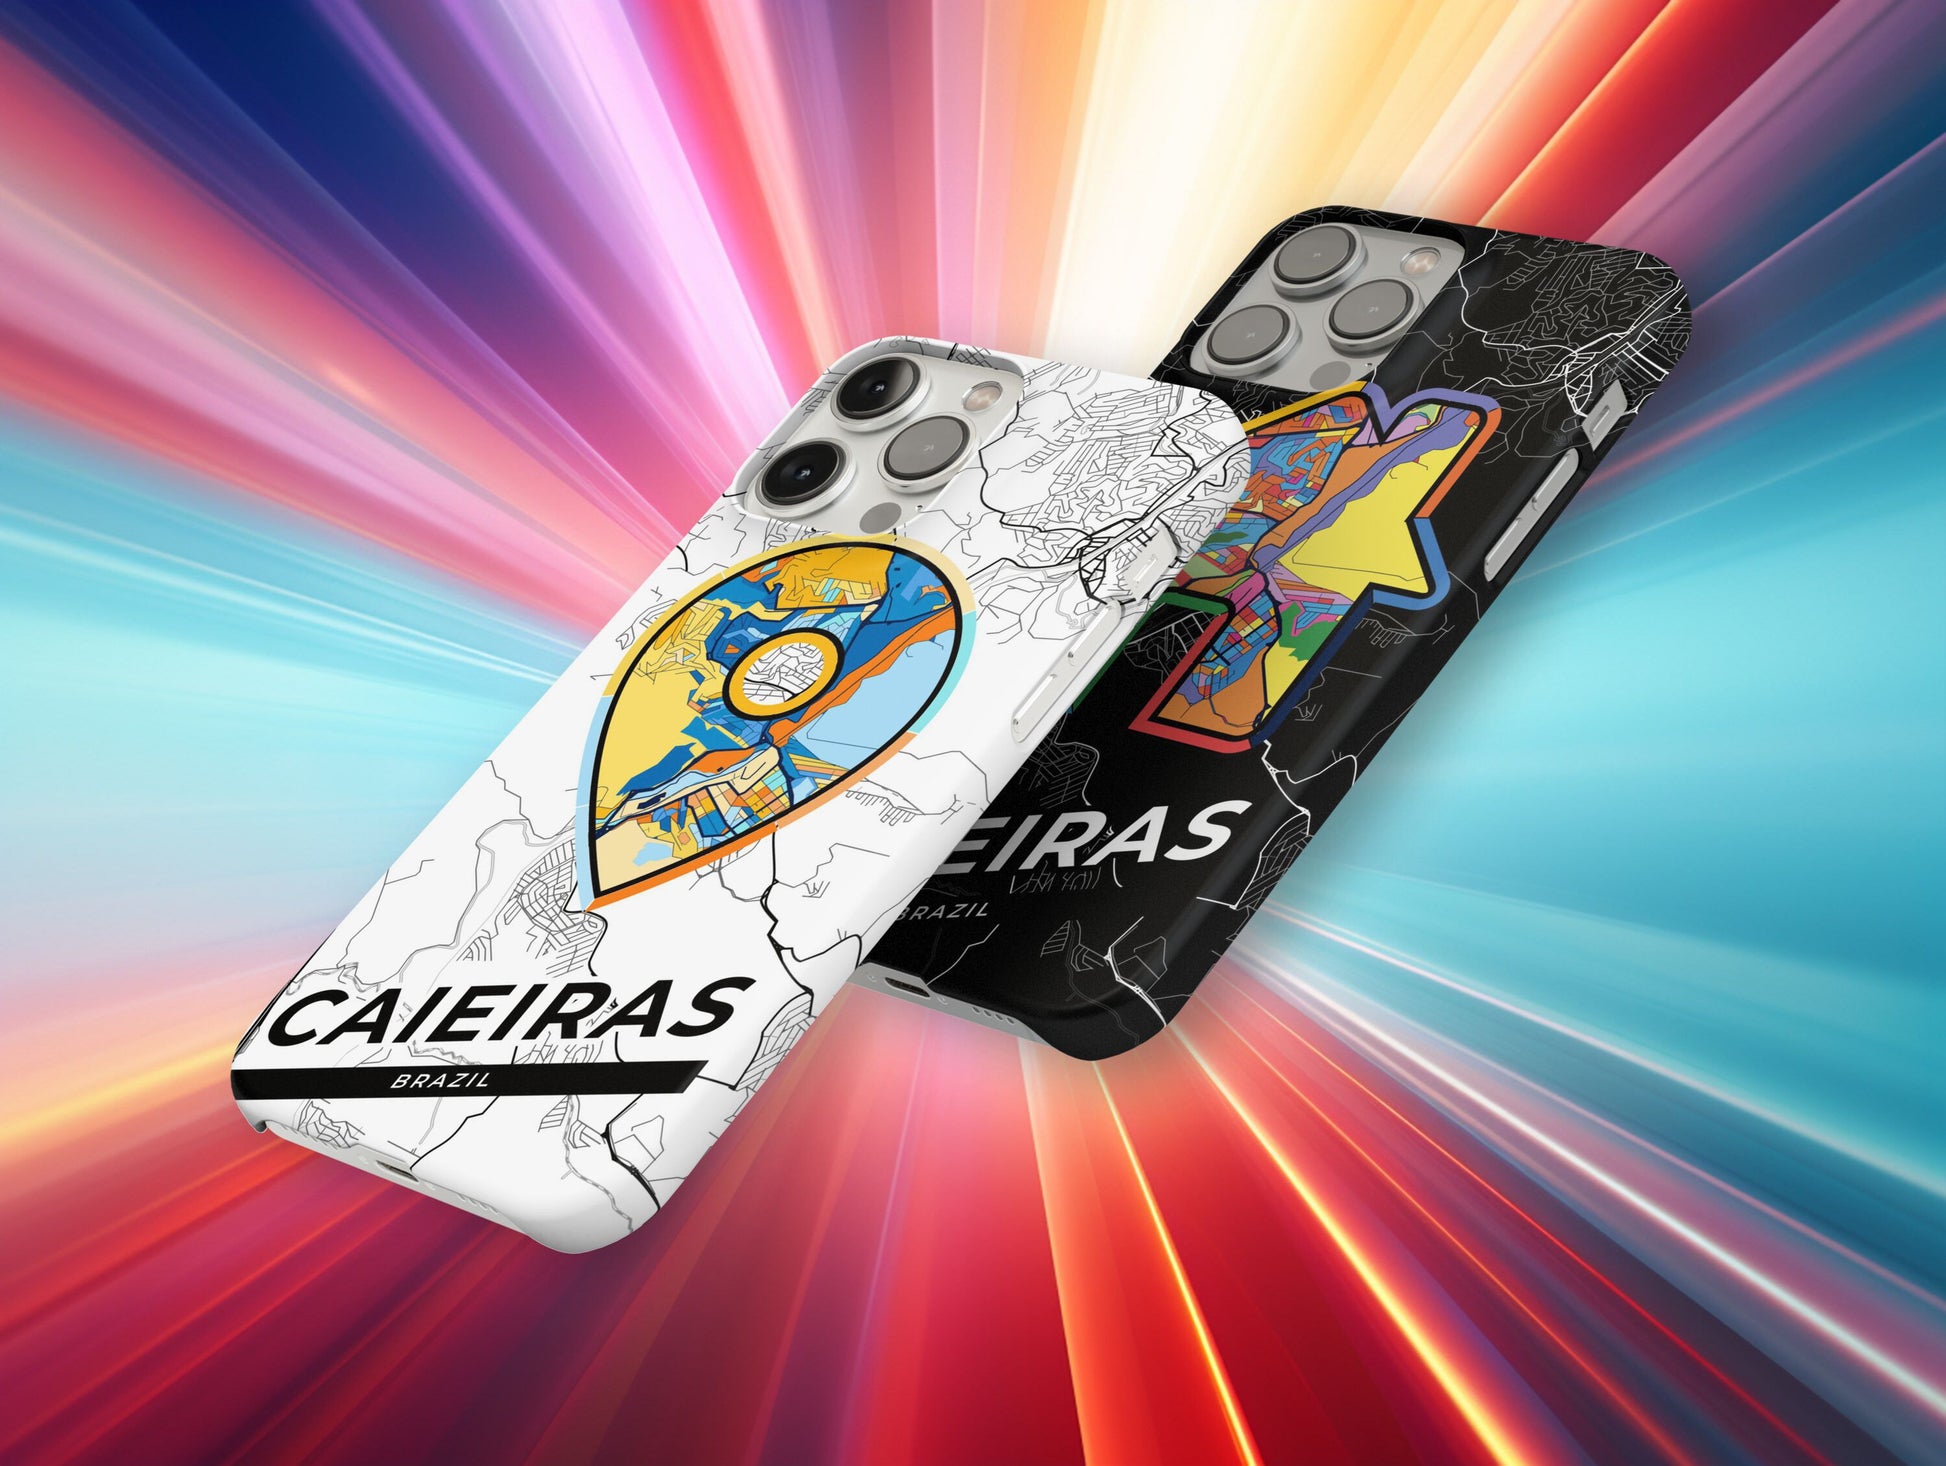 Caieiras Brazil slim phone case with colorful icon. Birthday, wedding or housewarming gift. Couple match cases.